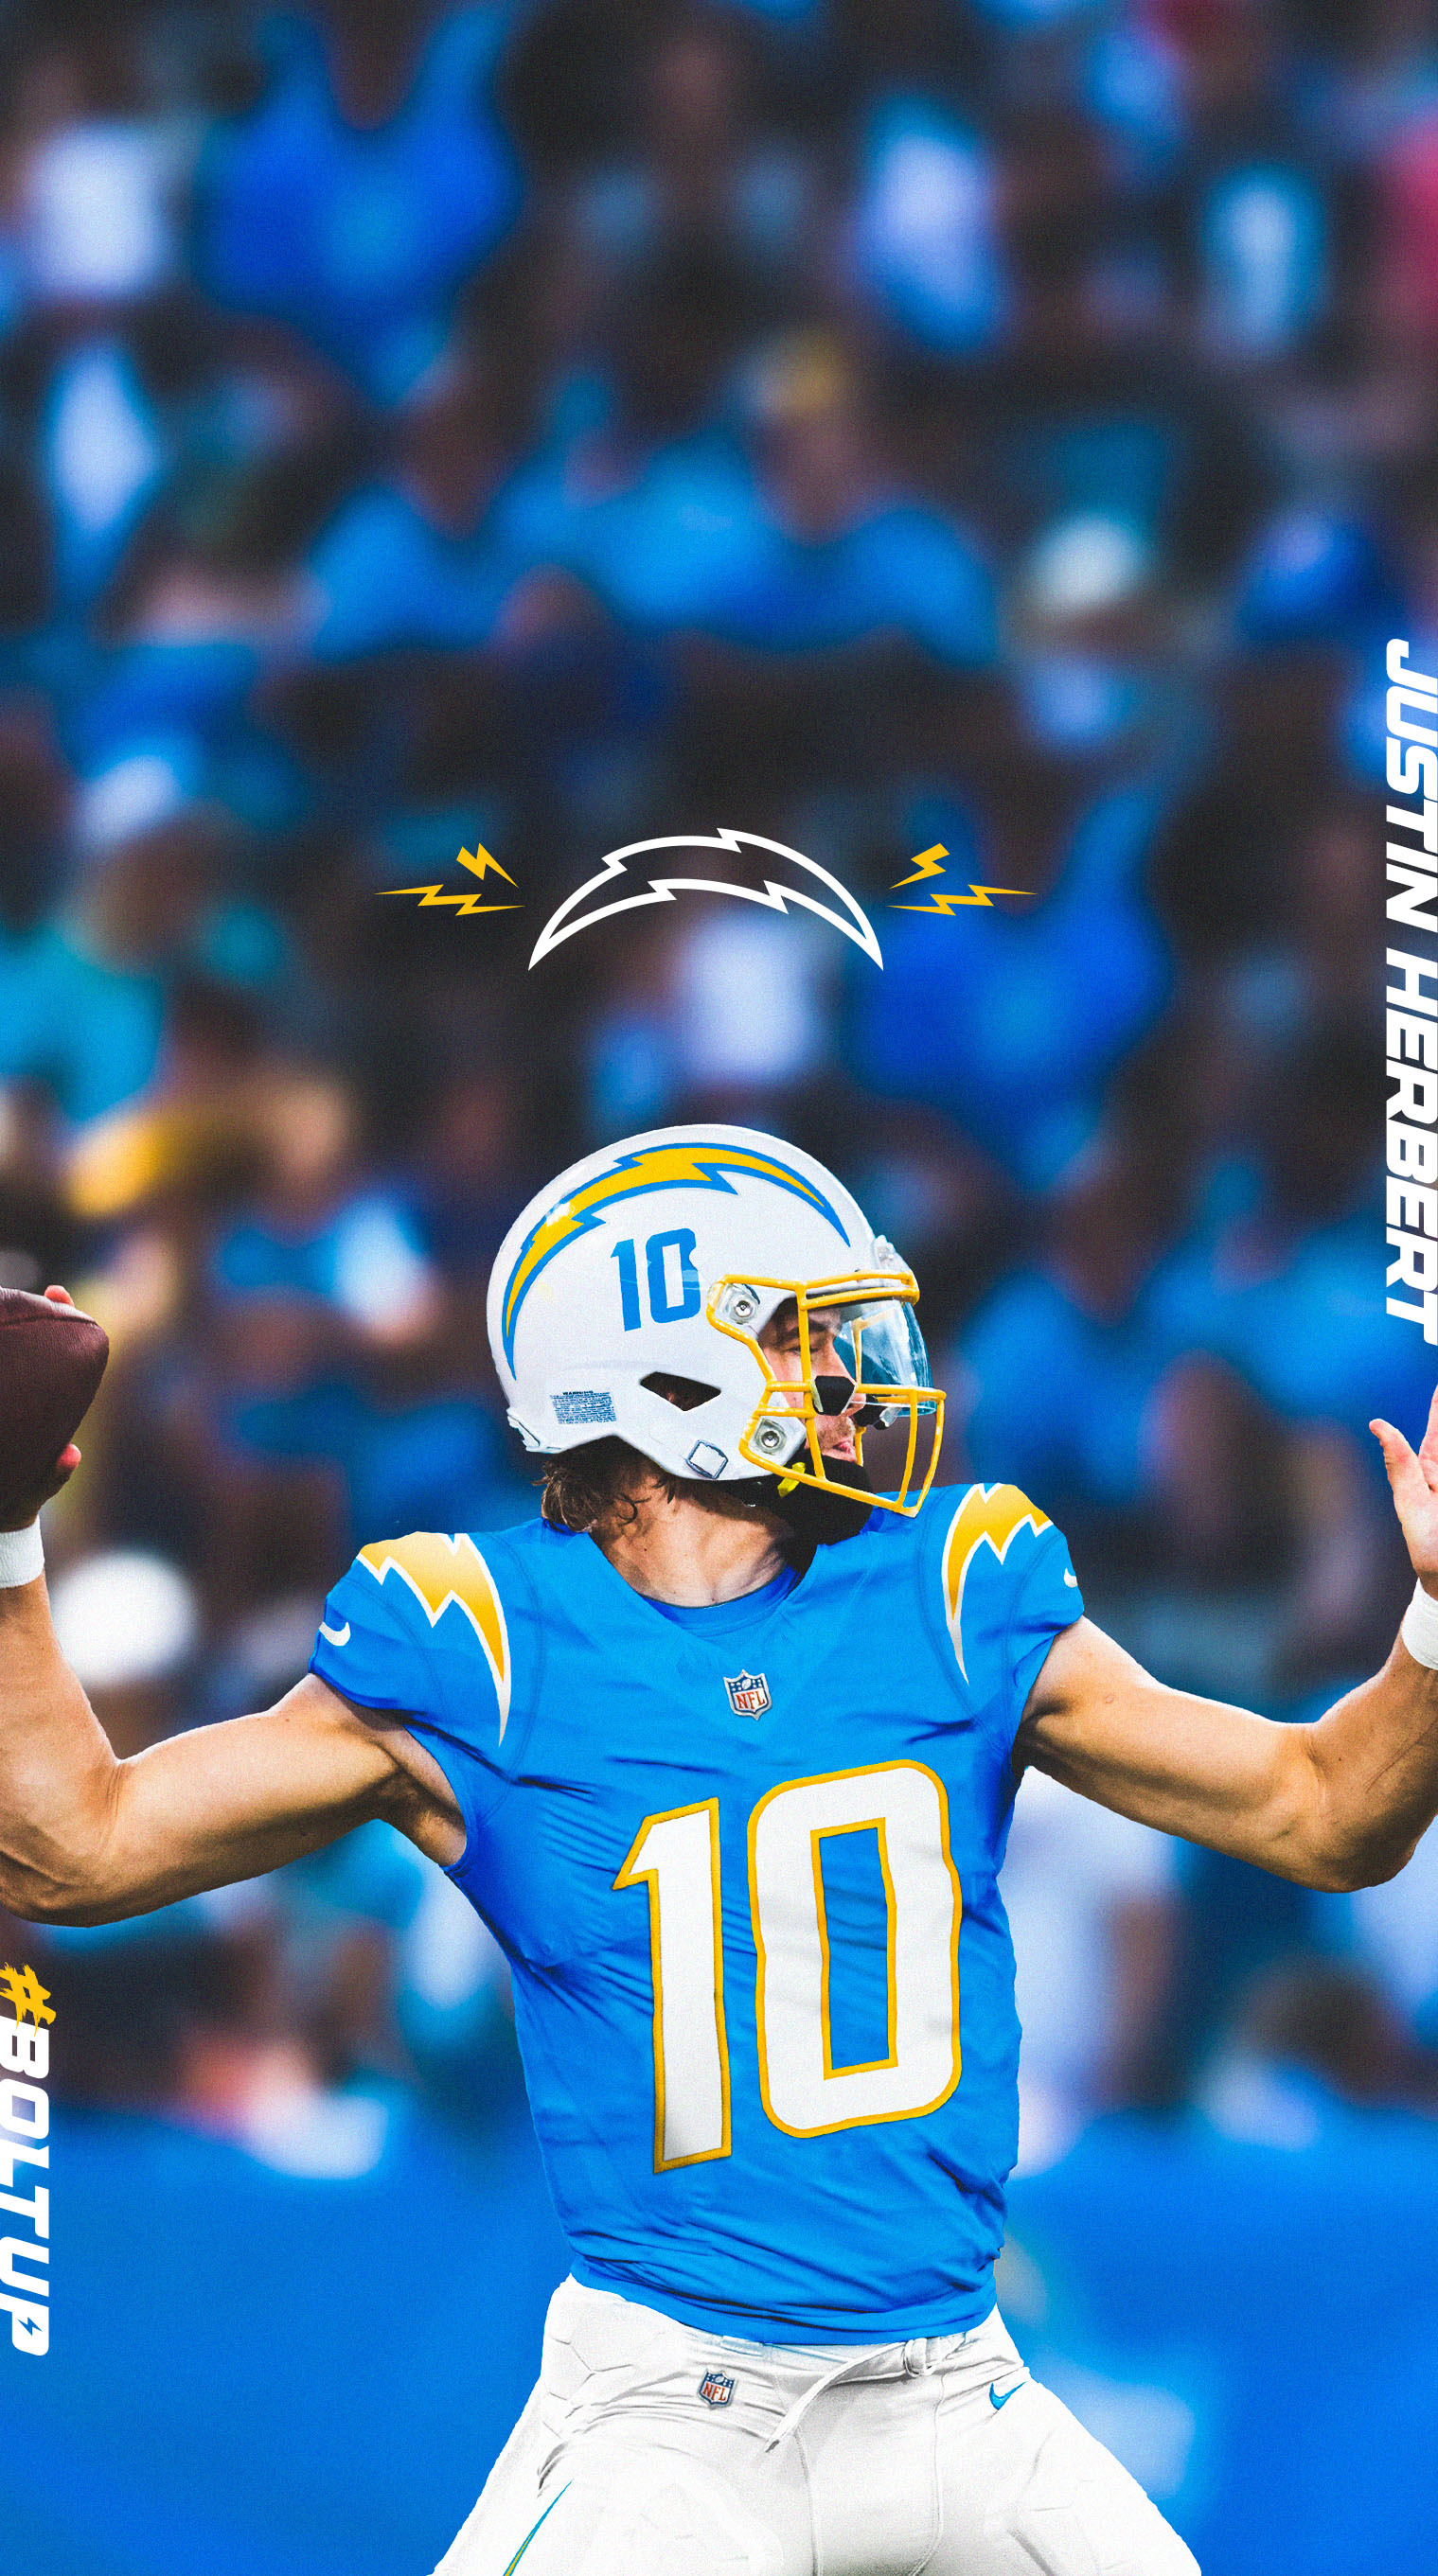 Anyone have a cool Justin Herbert phone wallpaper?: Chargers